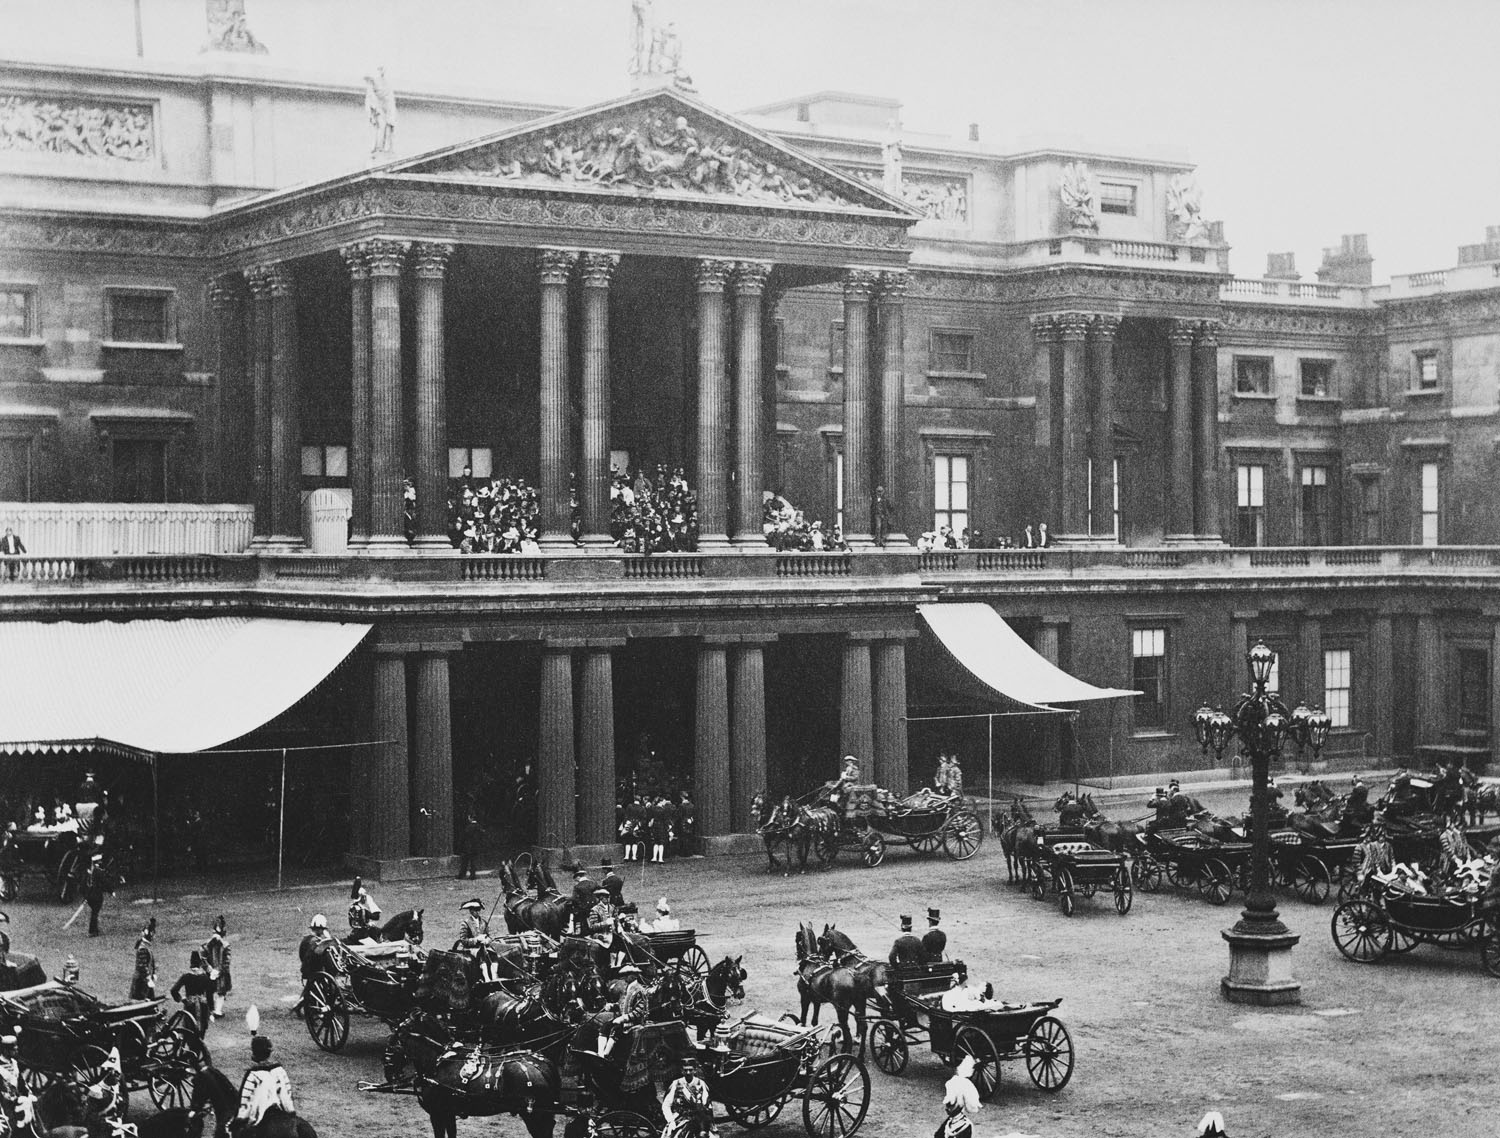 Buckingham palace during diamond jubilee of queen victoria